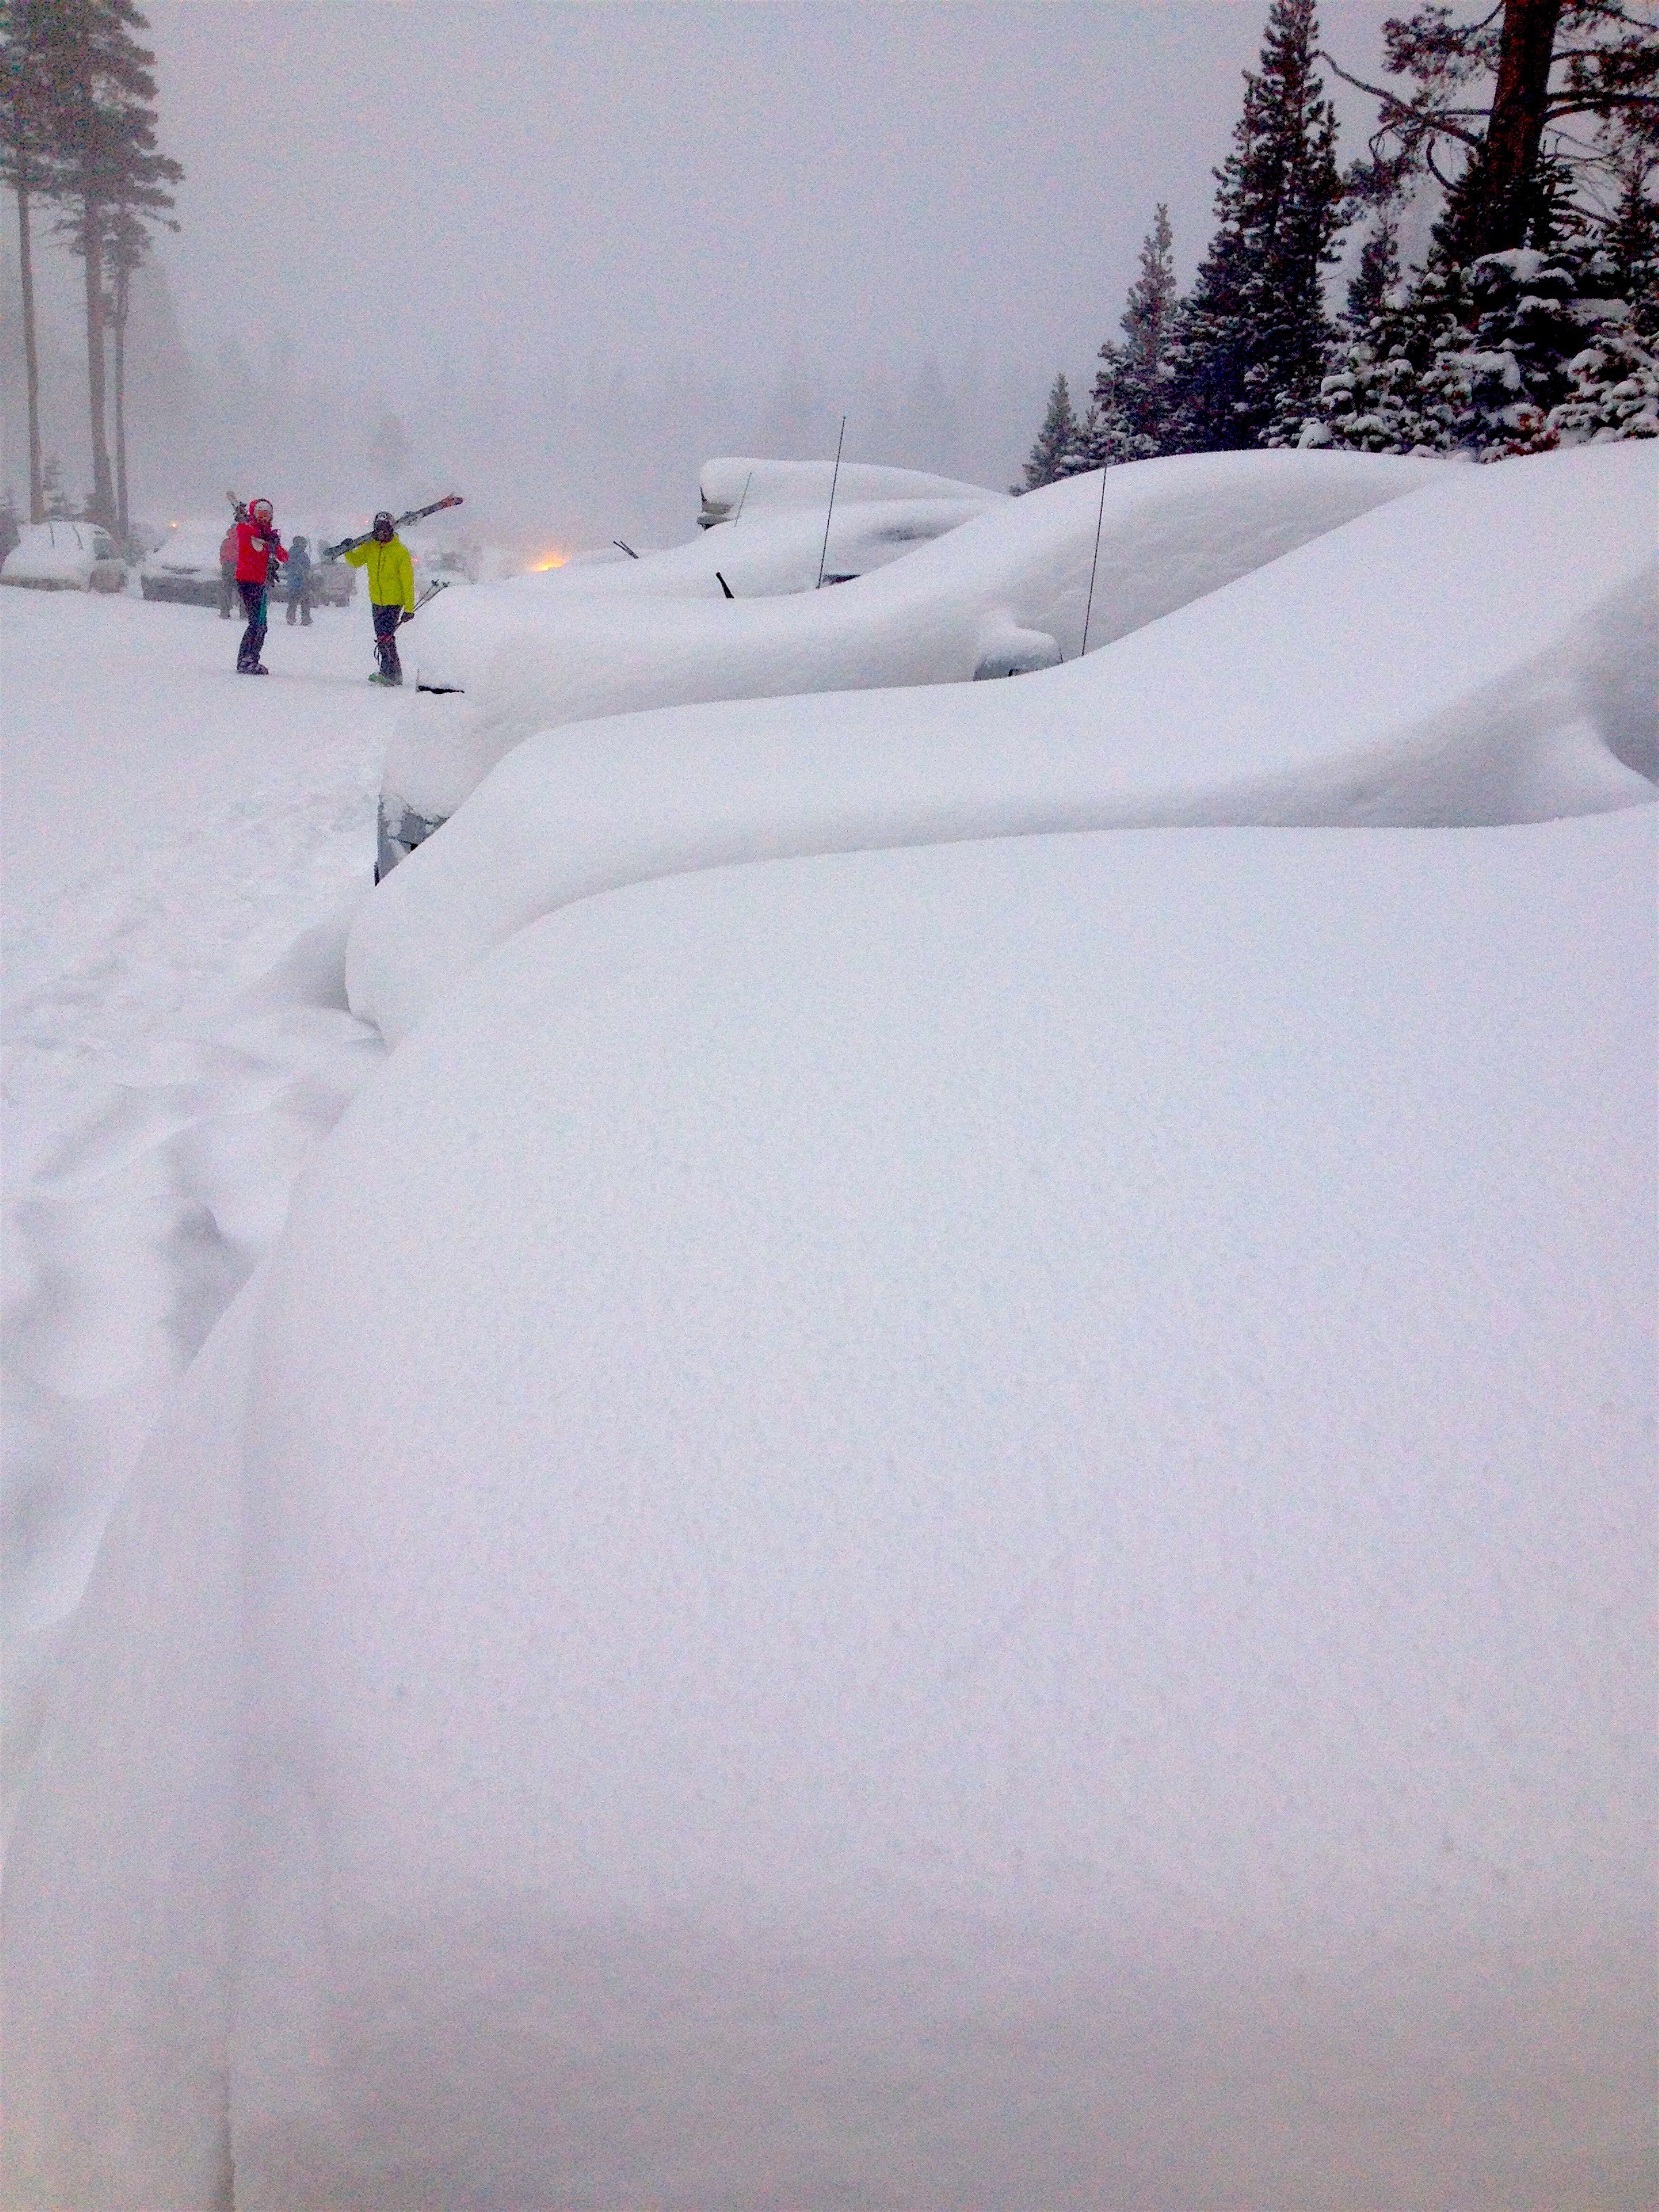 Parking lot cars looking a bit buried at 4pm today. photo: snowbrains